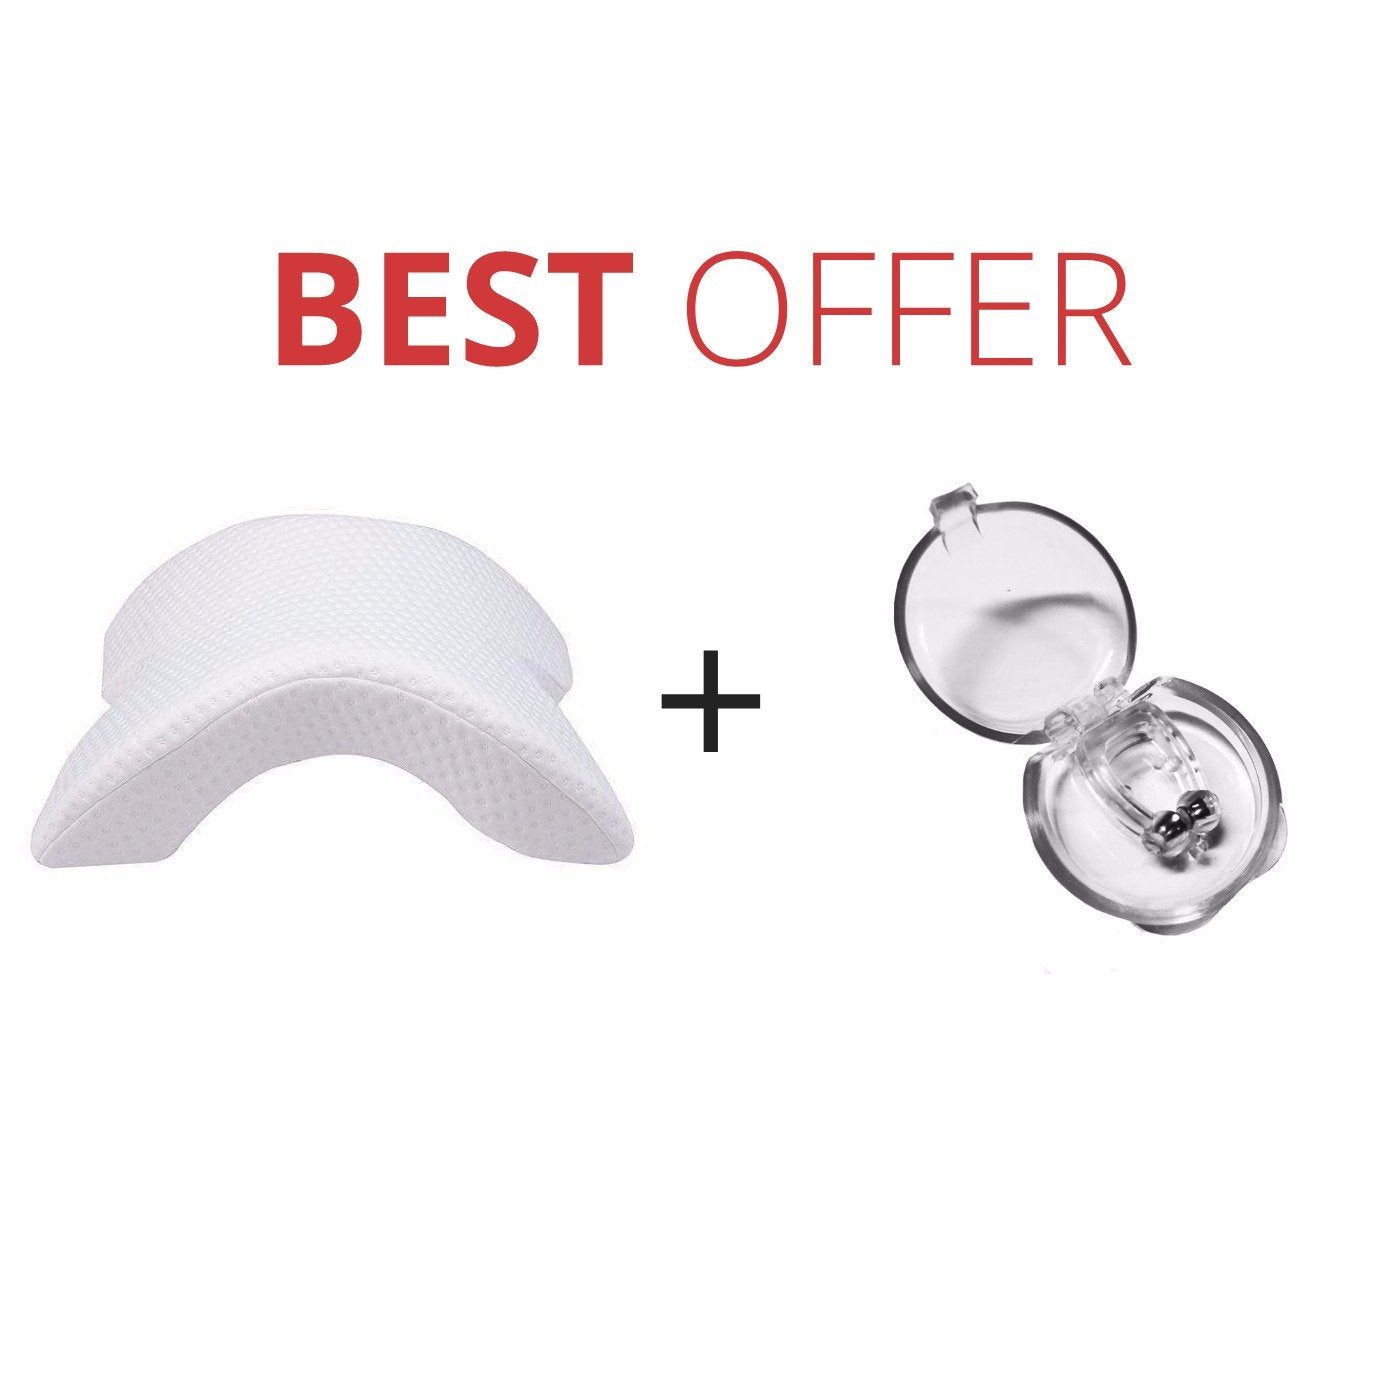 Silicone Magnetic Anti Snore Stop Snoring Nose Clip Sleep Tray Sleeping Aid Apnea Guard Night Device